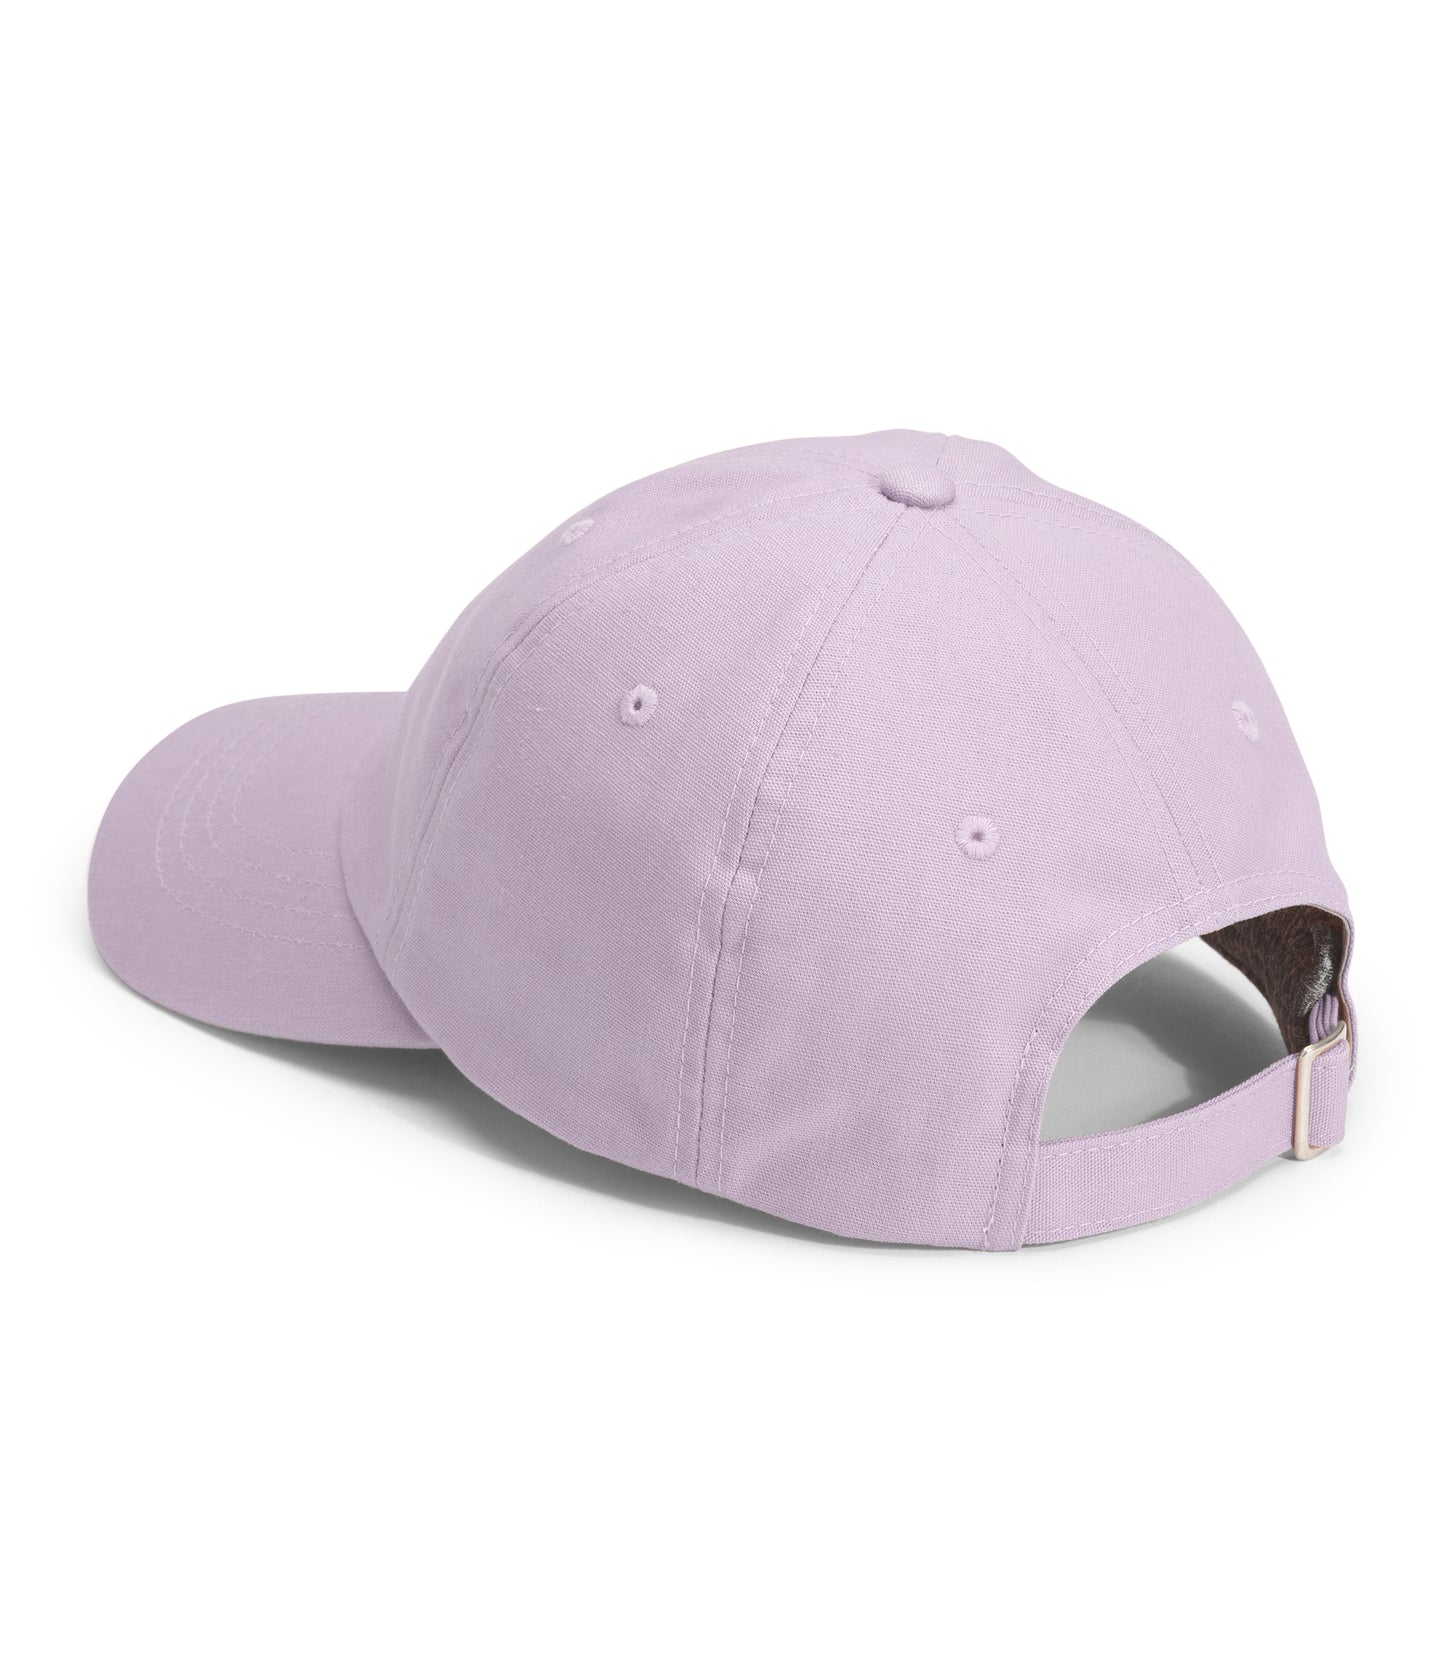 GORRA / NORM / THE NORTH FACE